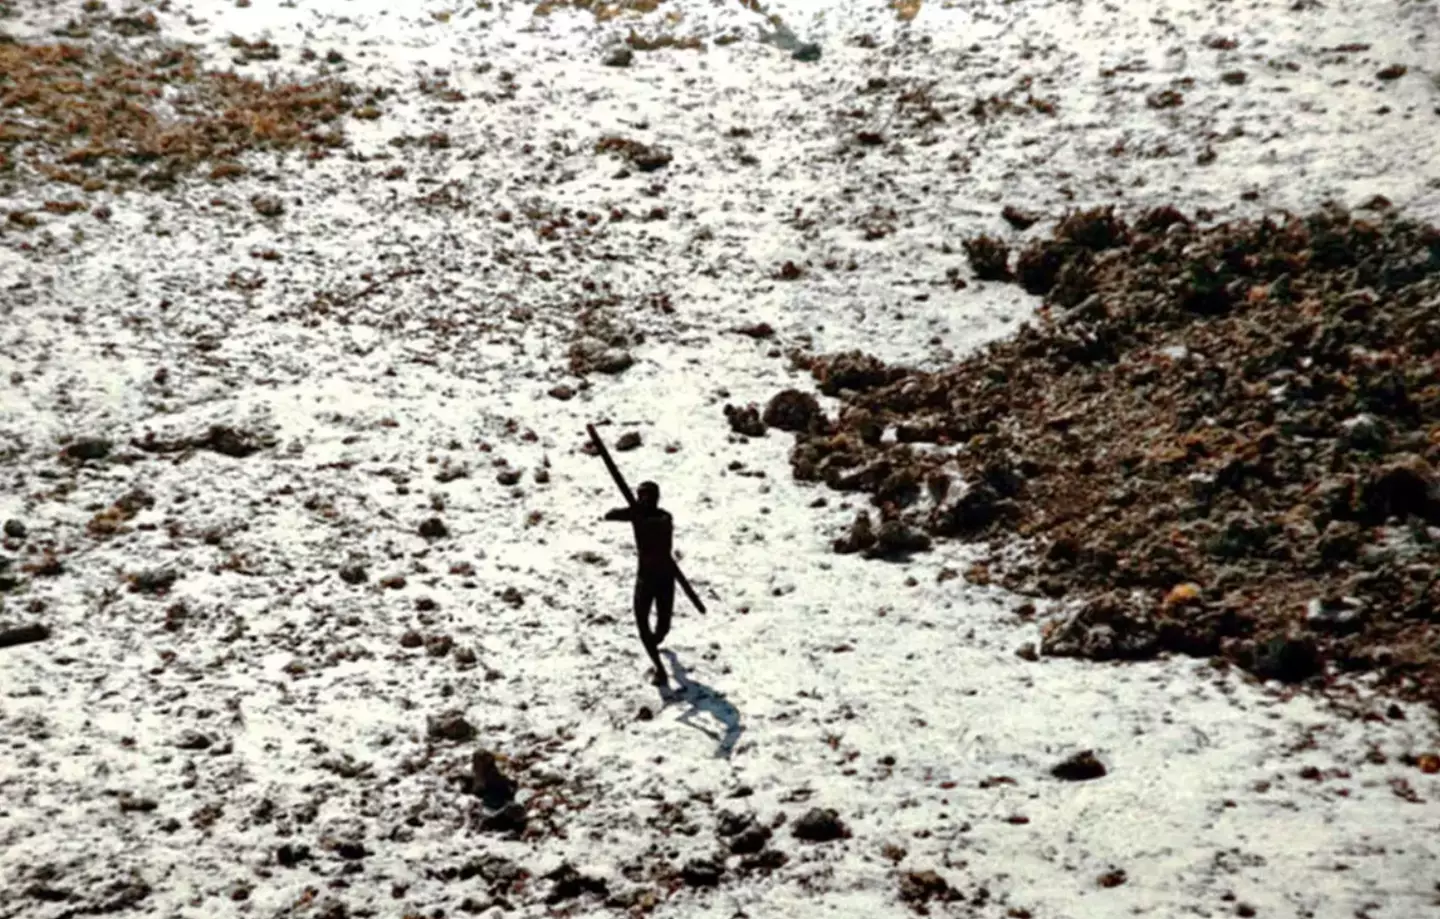 A member of member of the Sentinelese tribe photographed aiming arrows at a helicopter.